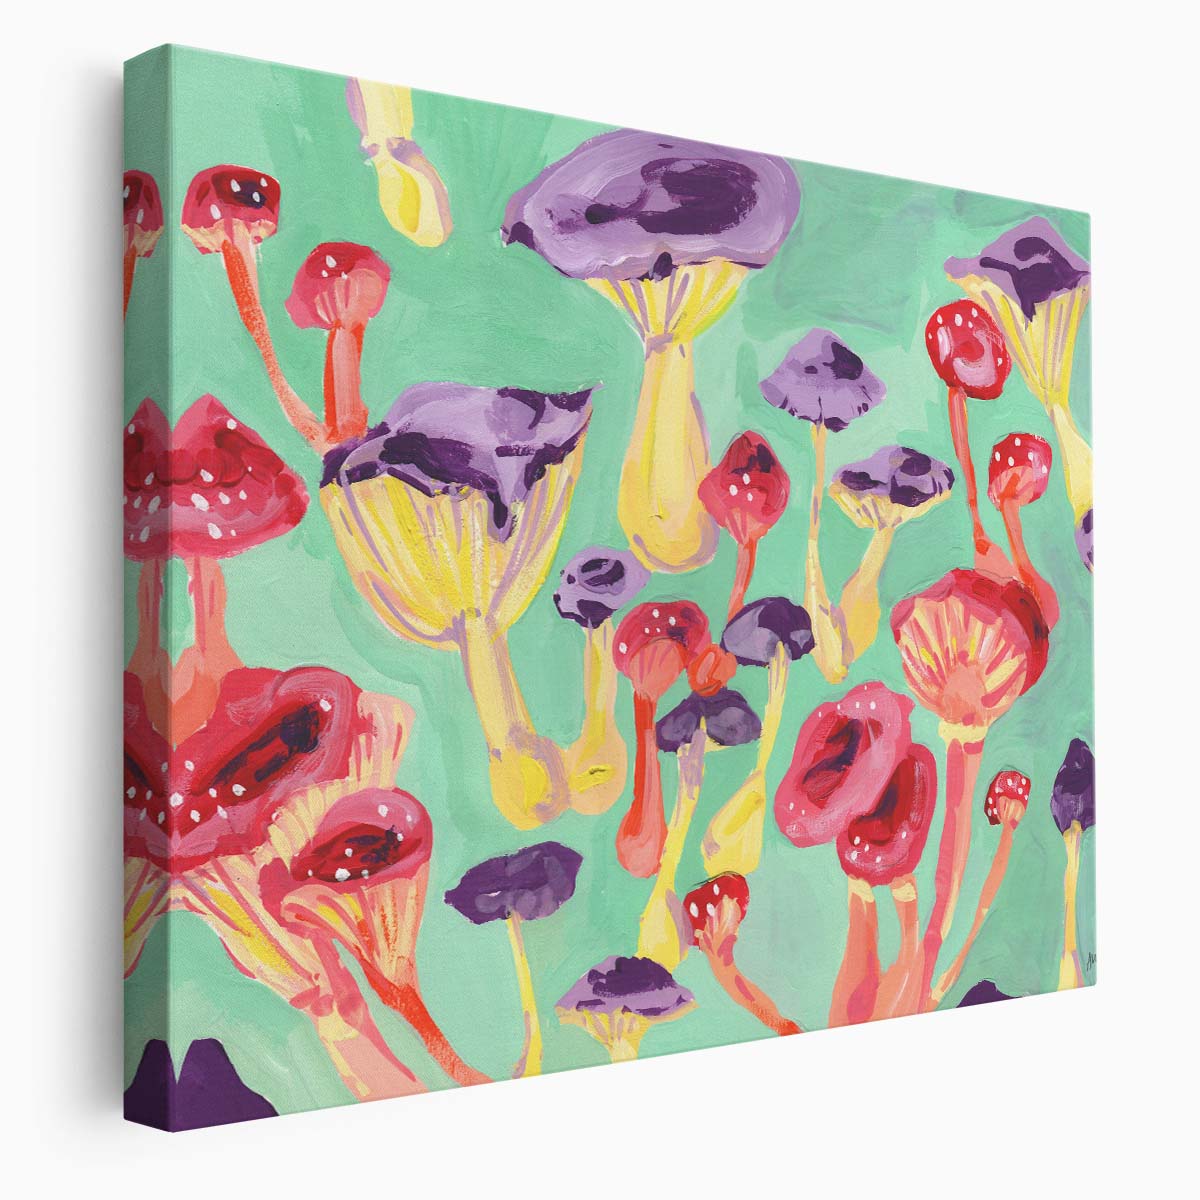 Enchanted Forest Mushrooms Bold Gouache Landscape Wall Art by Luxuriance Designs. Made in USA.